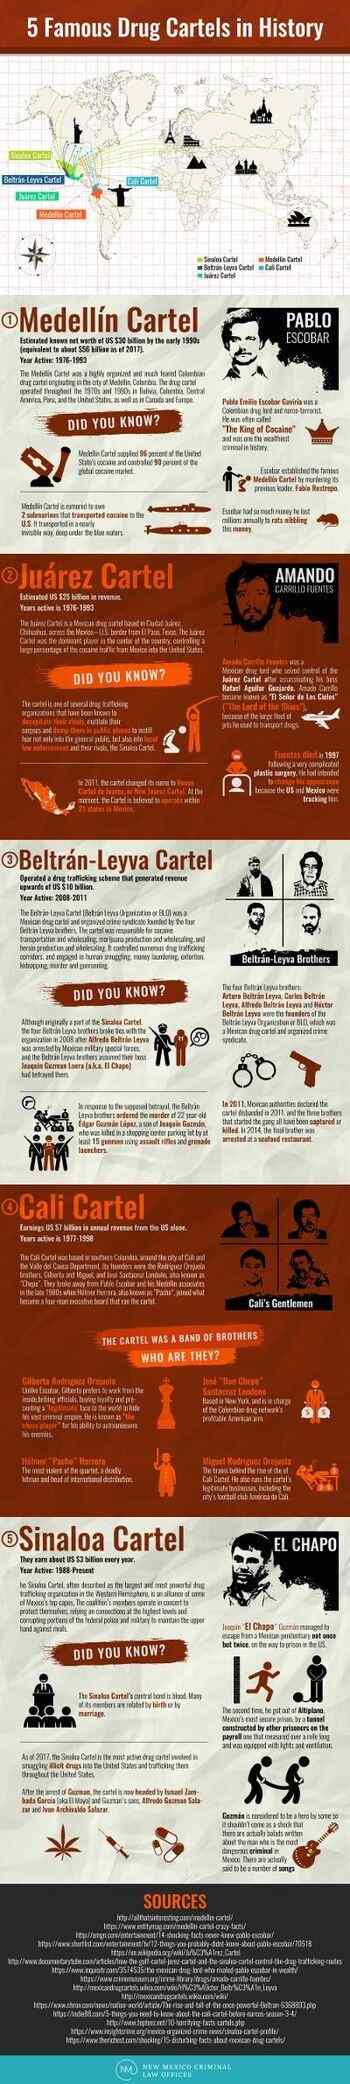 New Mexico Criminal Law Drug Cartel Infographic